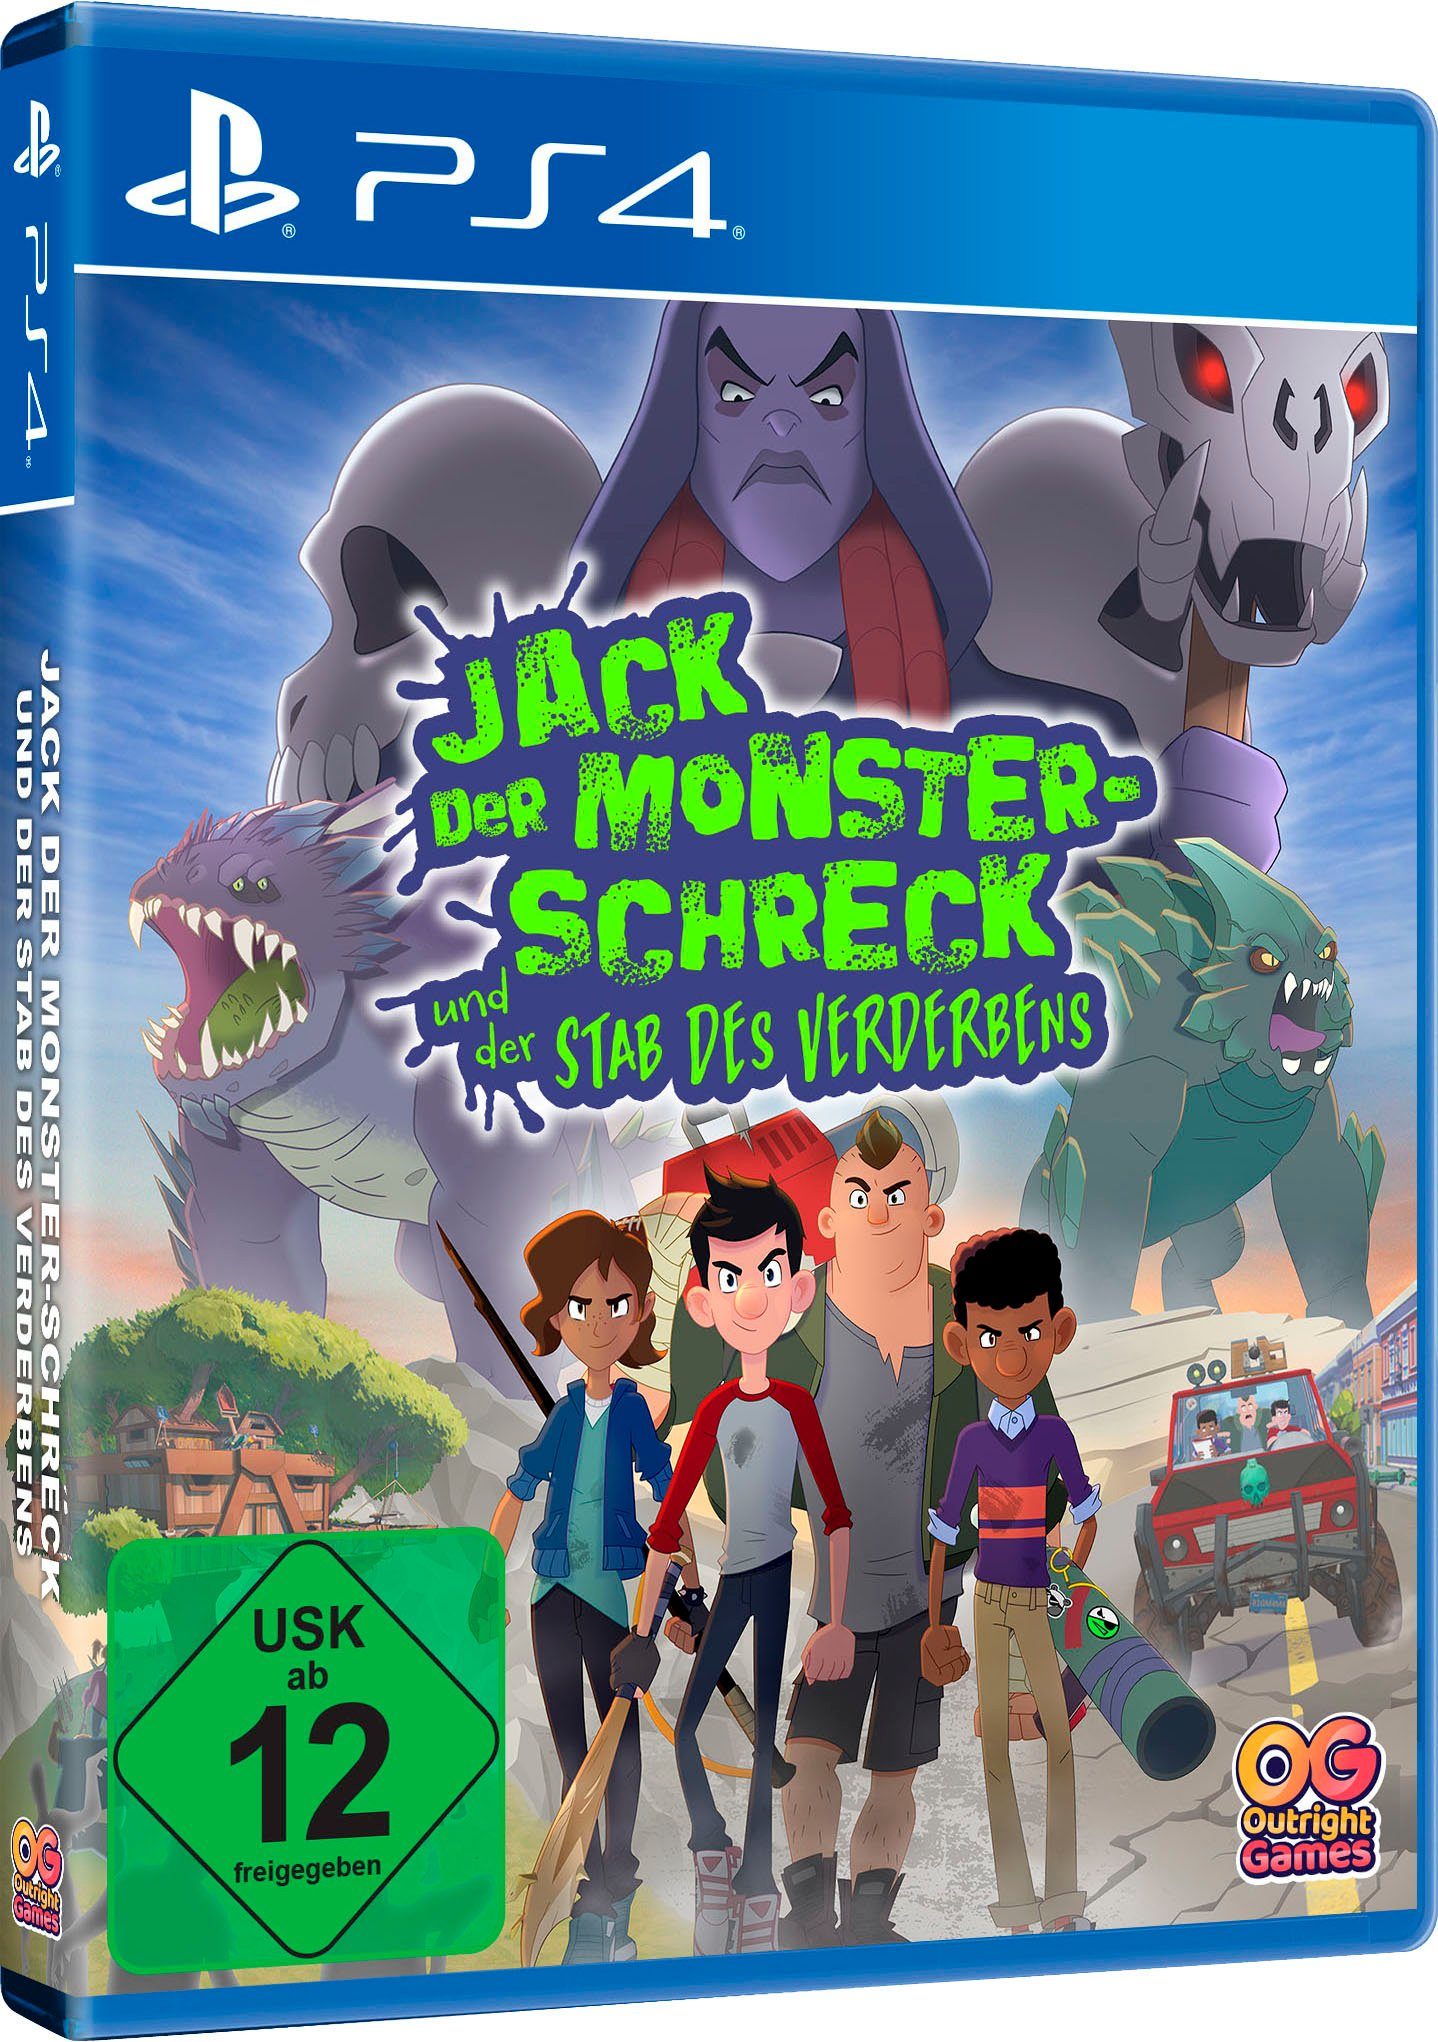 Outright Games Kids 4 on Jack, PlayStation der Earth) (The Last Monsterschreck